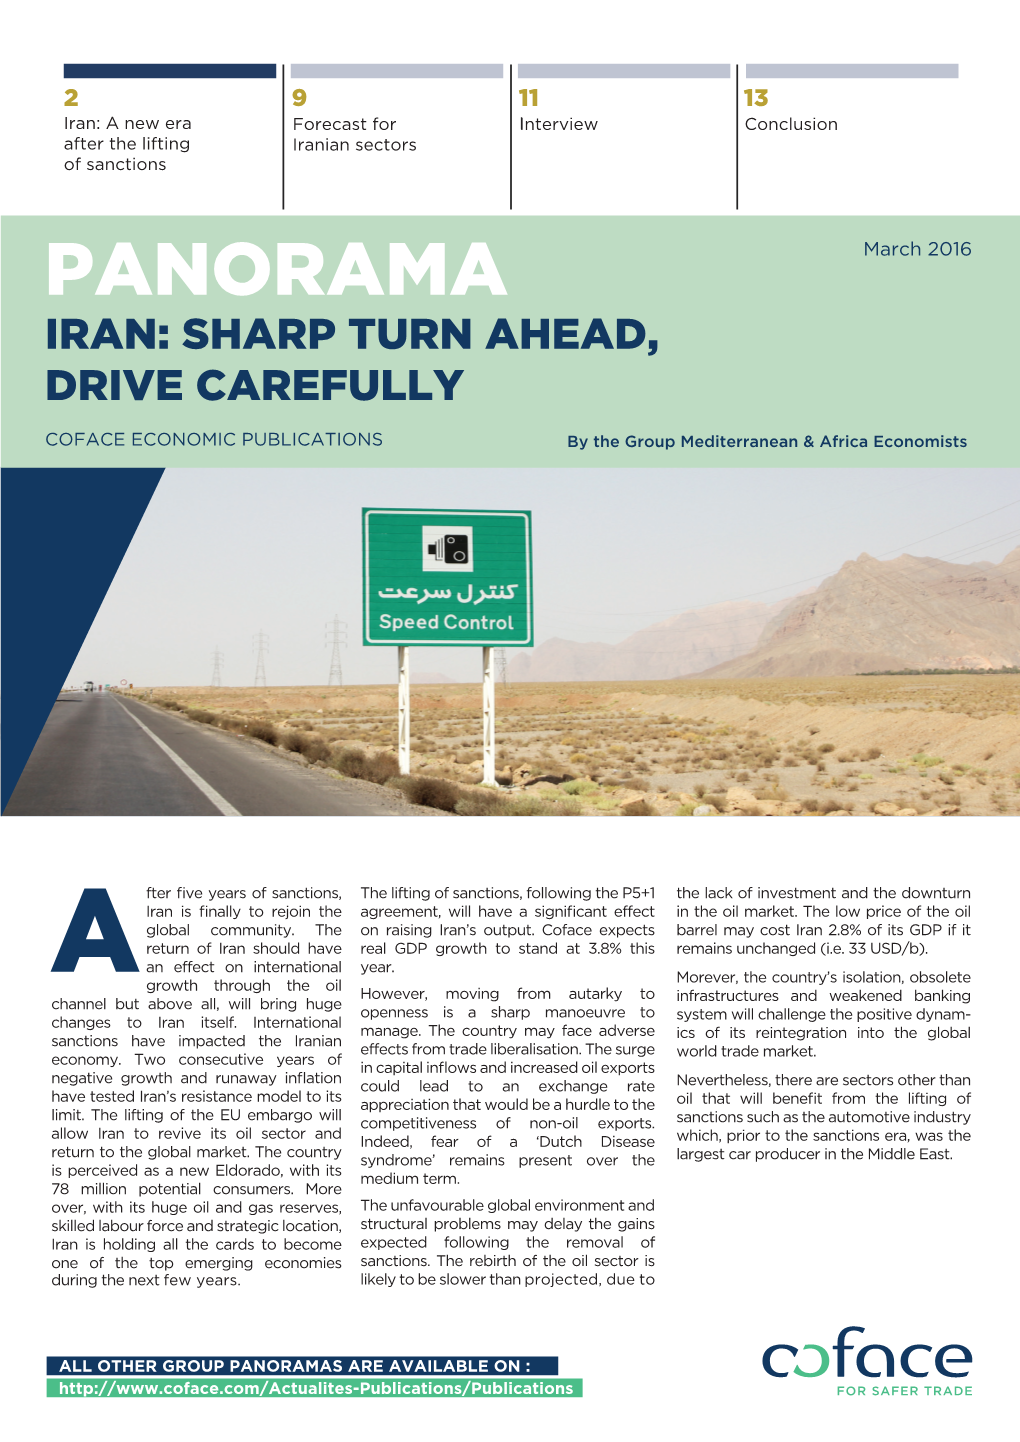 Iran: a New Era Forecast for Iinterview Conclusion After the Lifting Iranian Sectors of Sanctions PANORAMA March 2016 IRAN: SHARP TURN AHEAD, DRIVE CAREFULLY